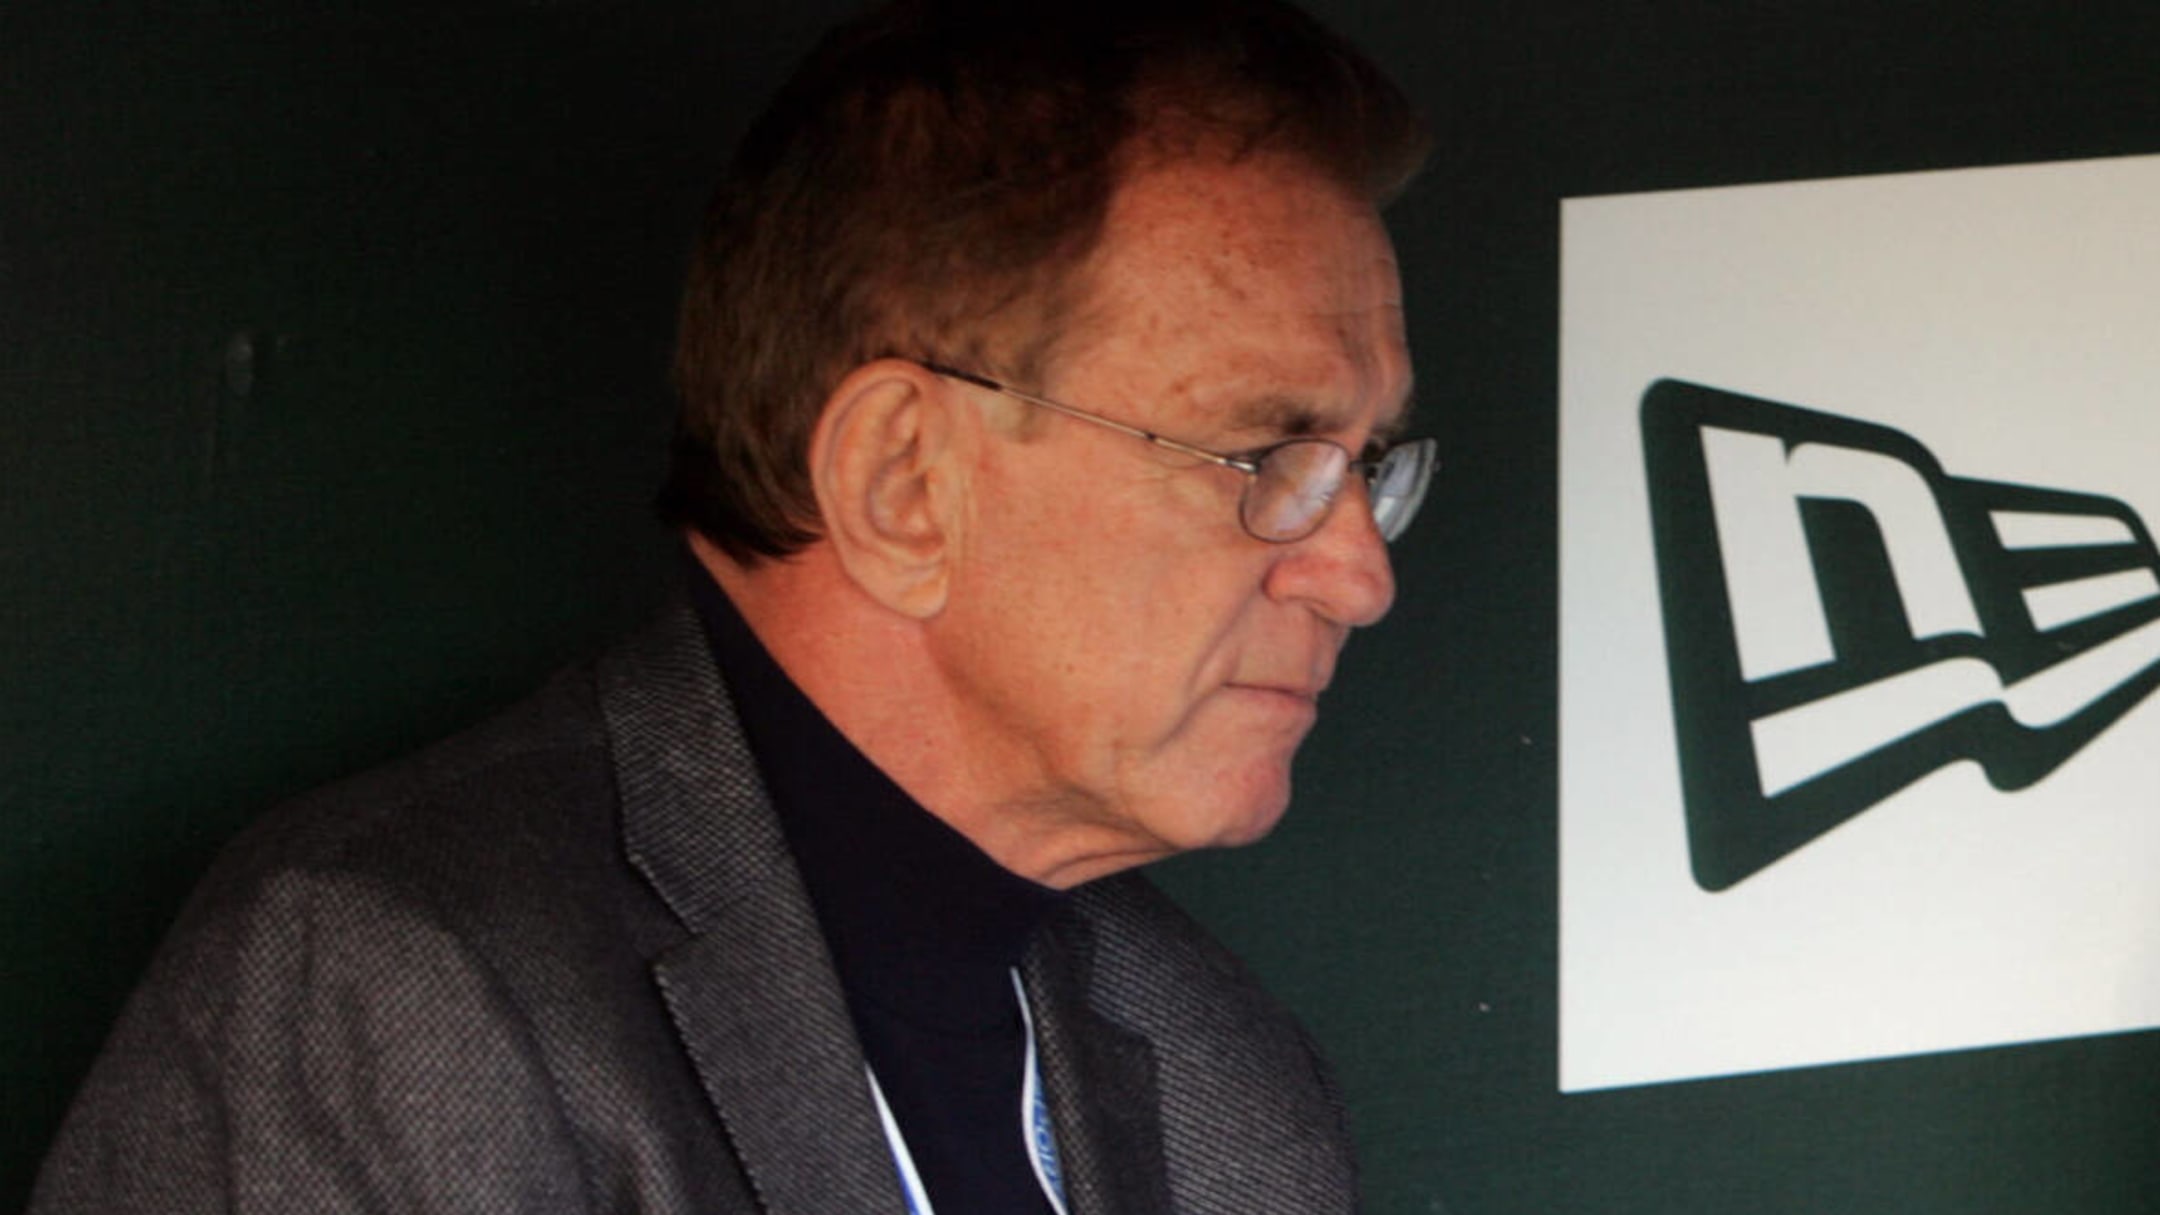 Tim McCarver, Catcher in the Hall of Fame as a Broadcaster, Dies at 81 -  The New York Times